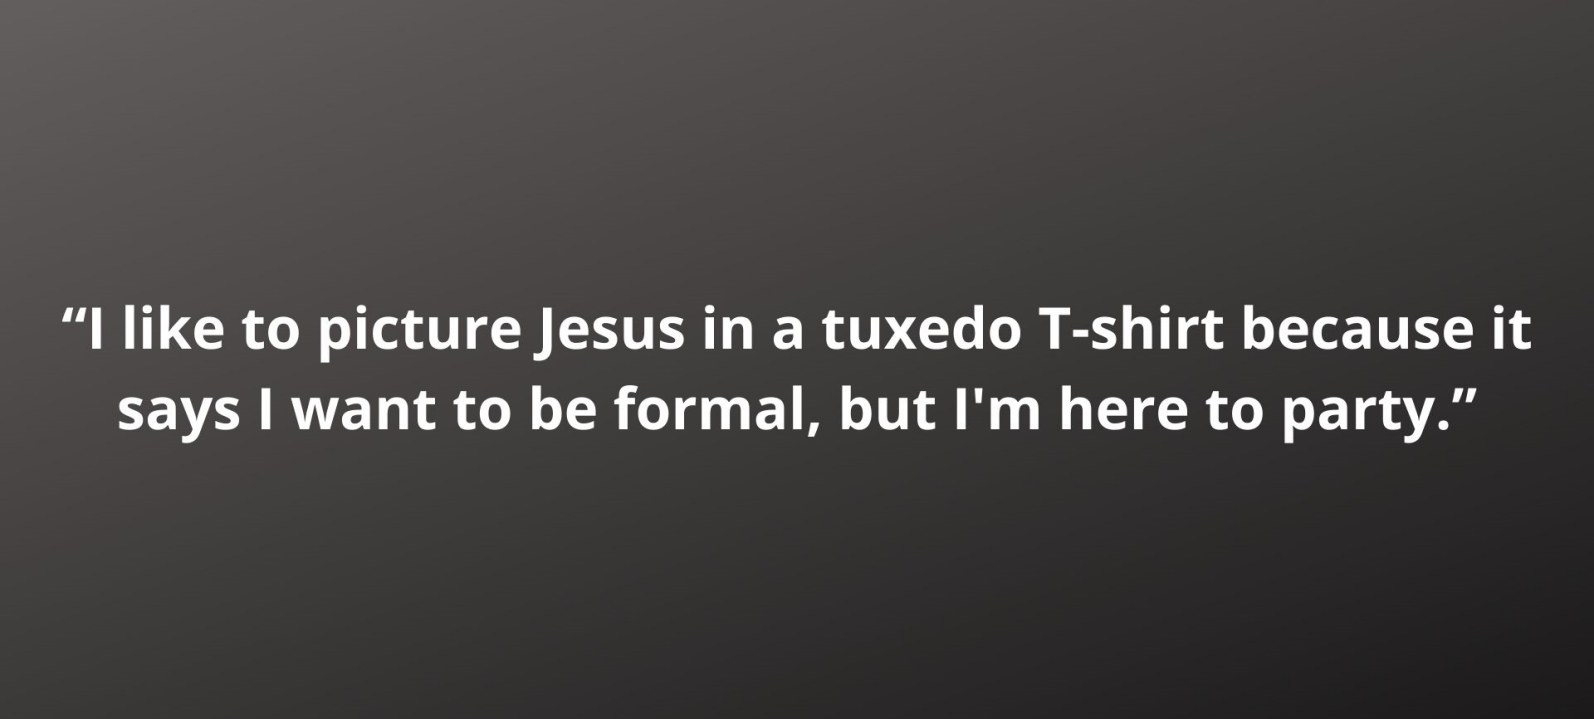 “I like to picture Jesus in a tuxedo T-shirt because it says I want to be formal, but I'm here to party.”